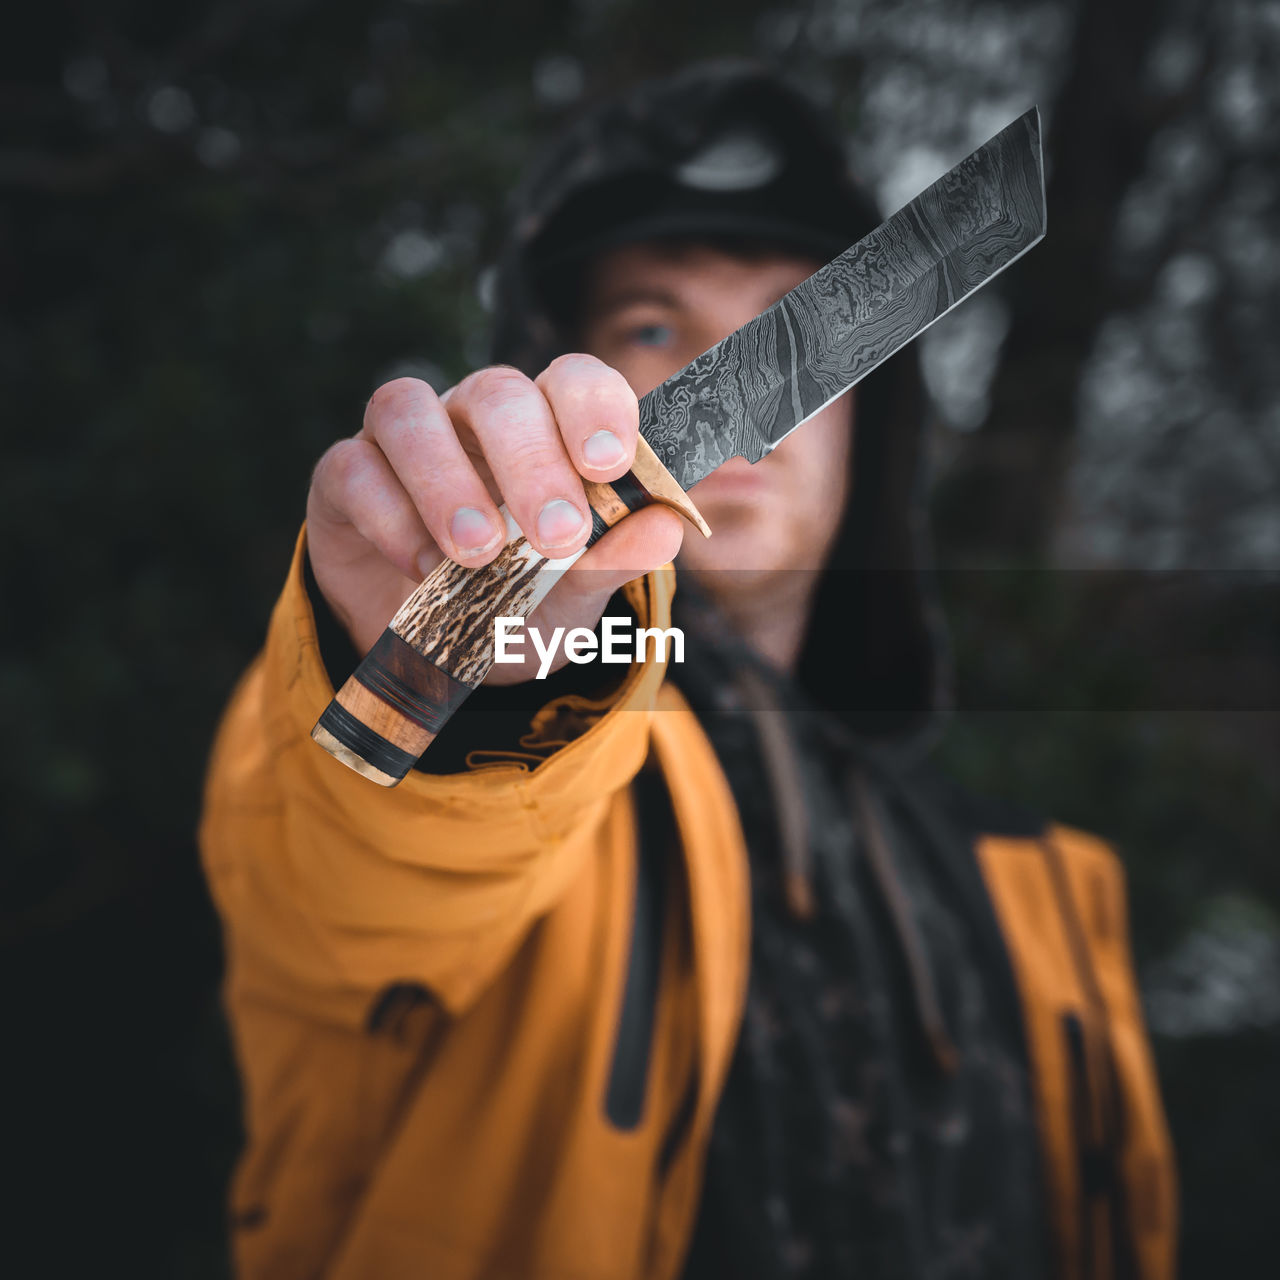 Midsection of man holding knife